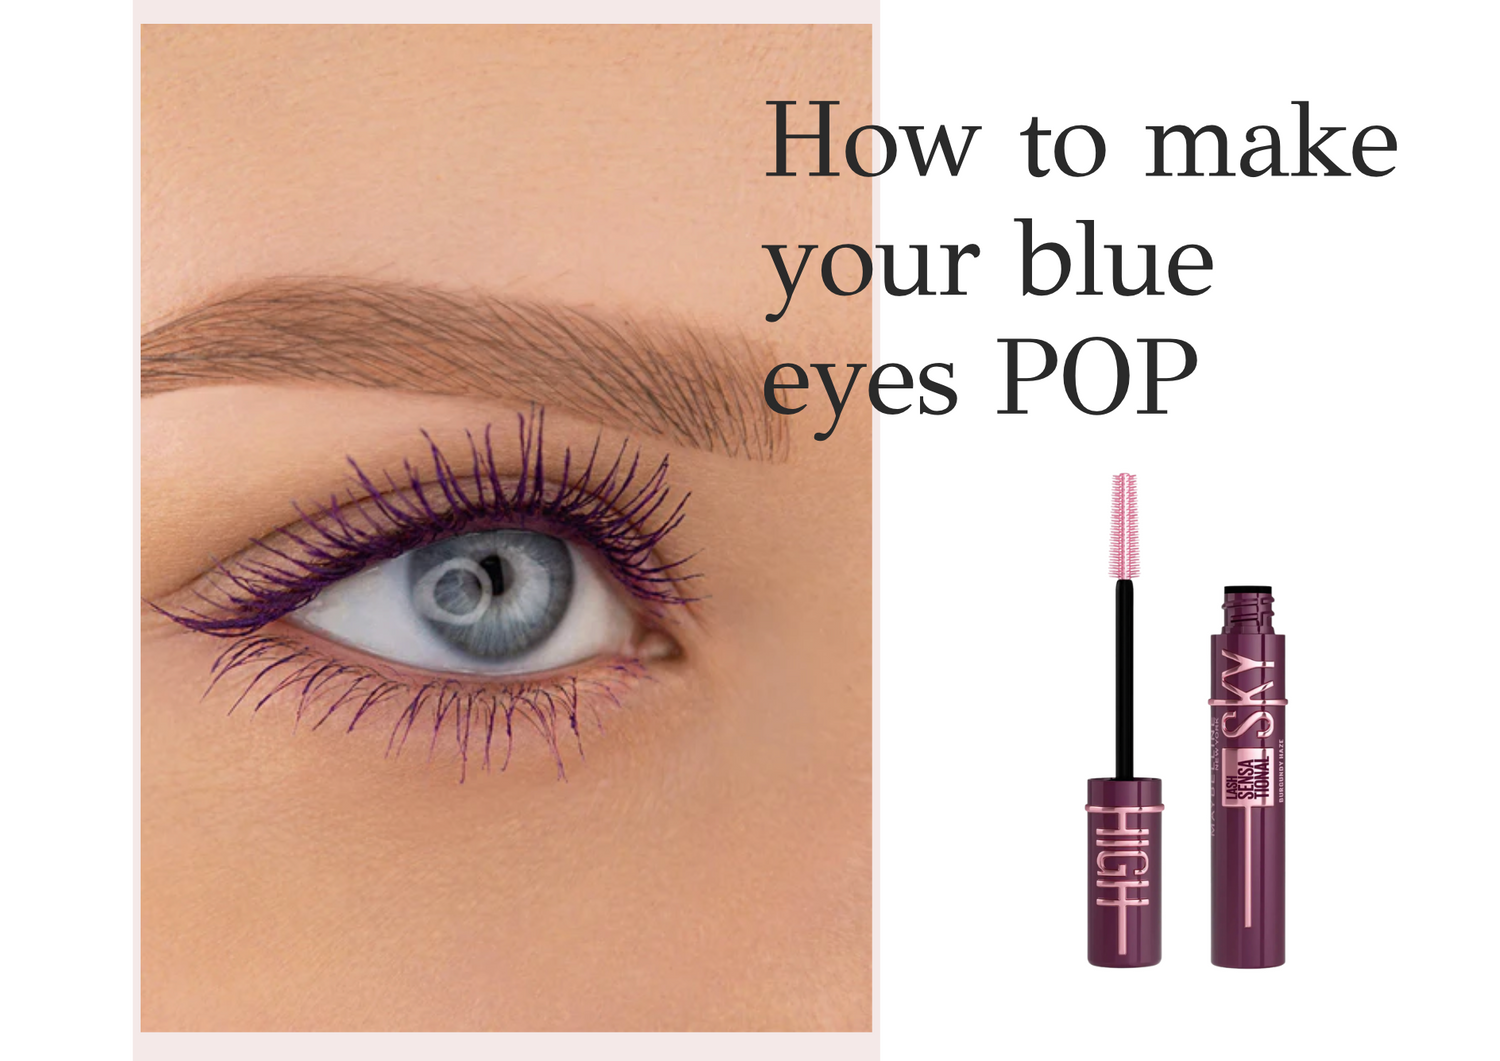 HOW TO MAKE YOUR BLUE EYES POP! - Use Purple Mascara